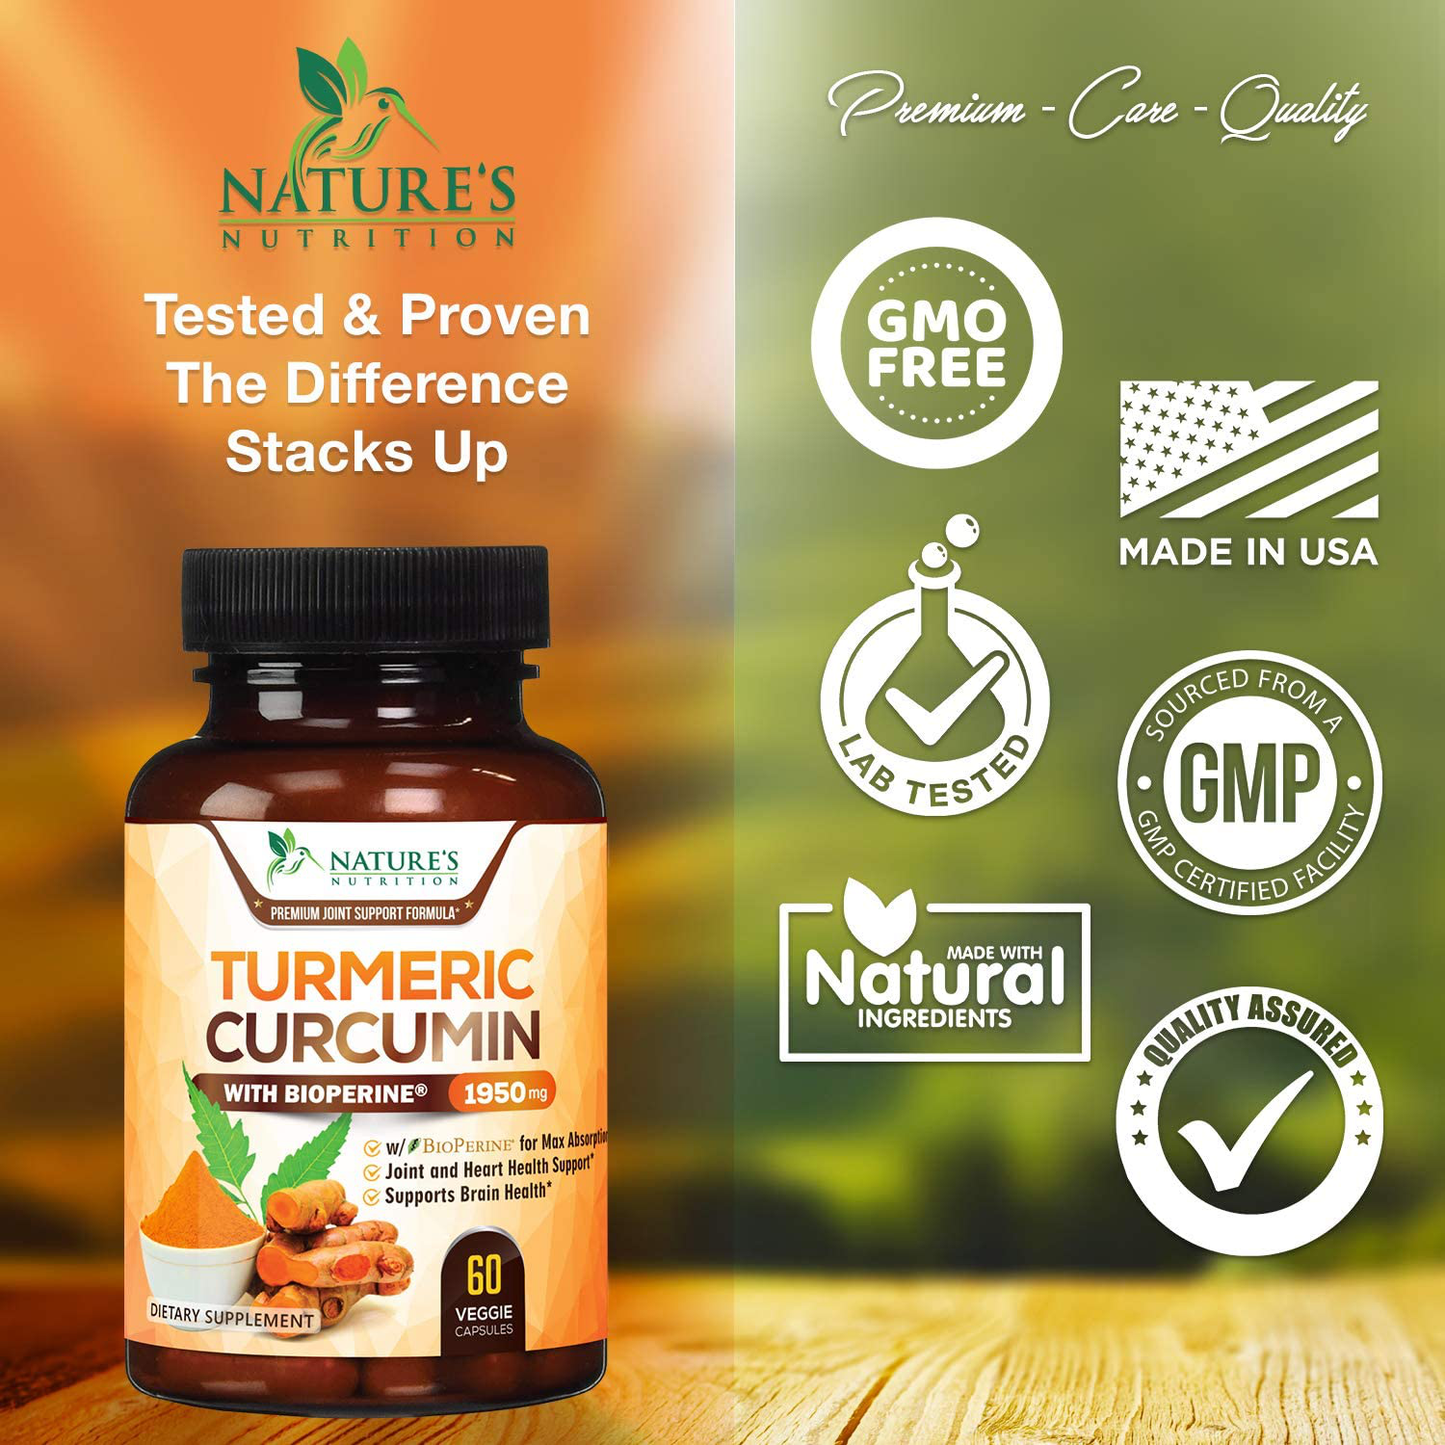 Turmeric Curcumin Highest Potency 95% Curcuminoids 1950mg with BioPerine Black Pepper for Ultra High Absorption, Made in USA, Best Vegan Joint Support by Natures Nutrition